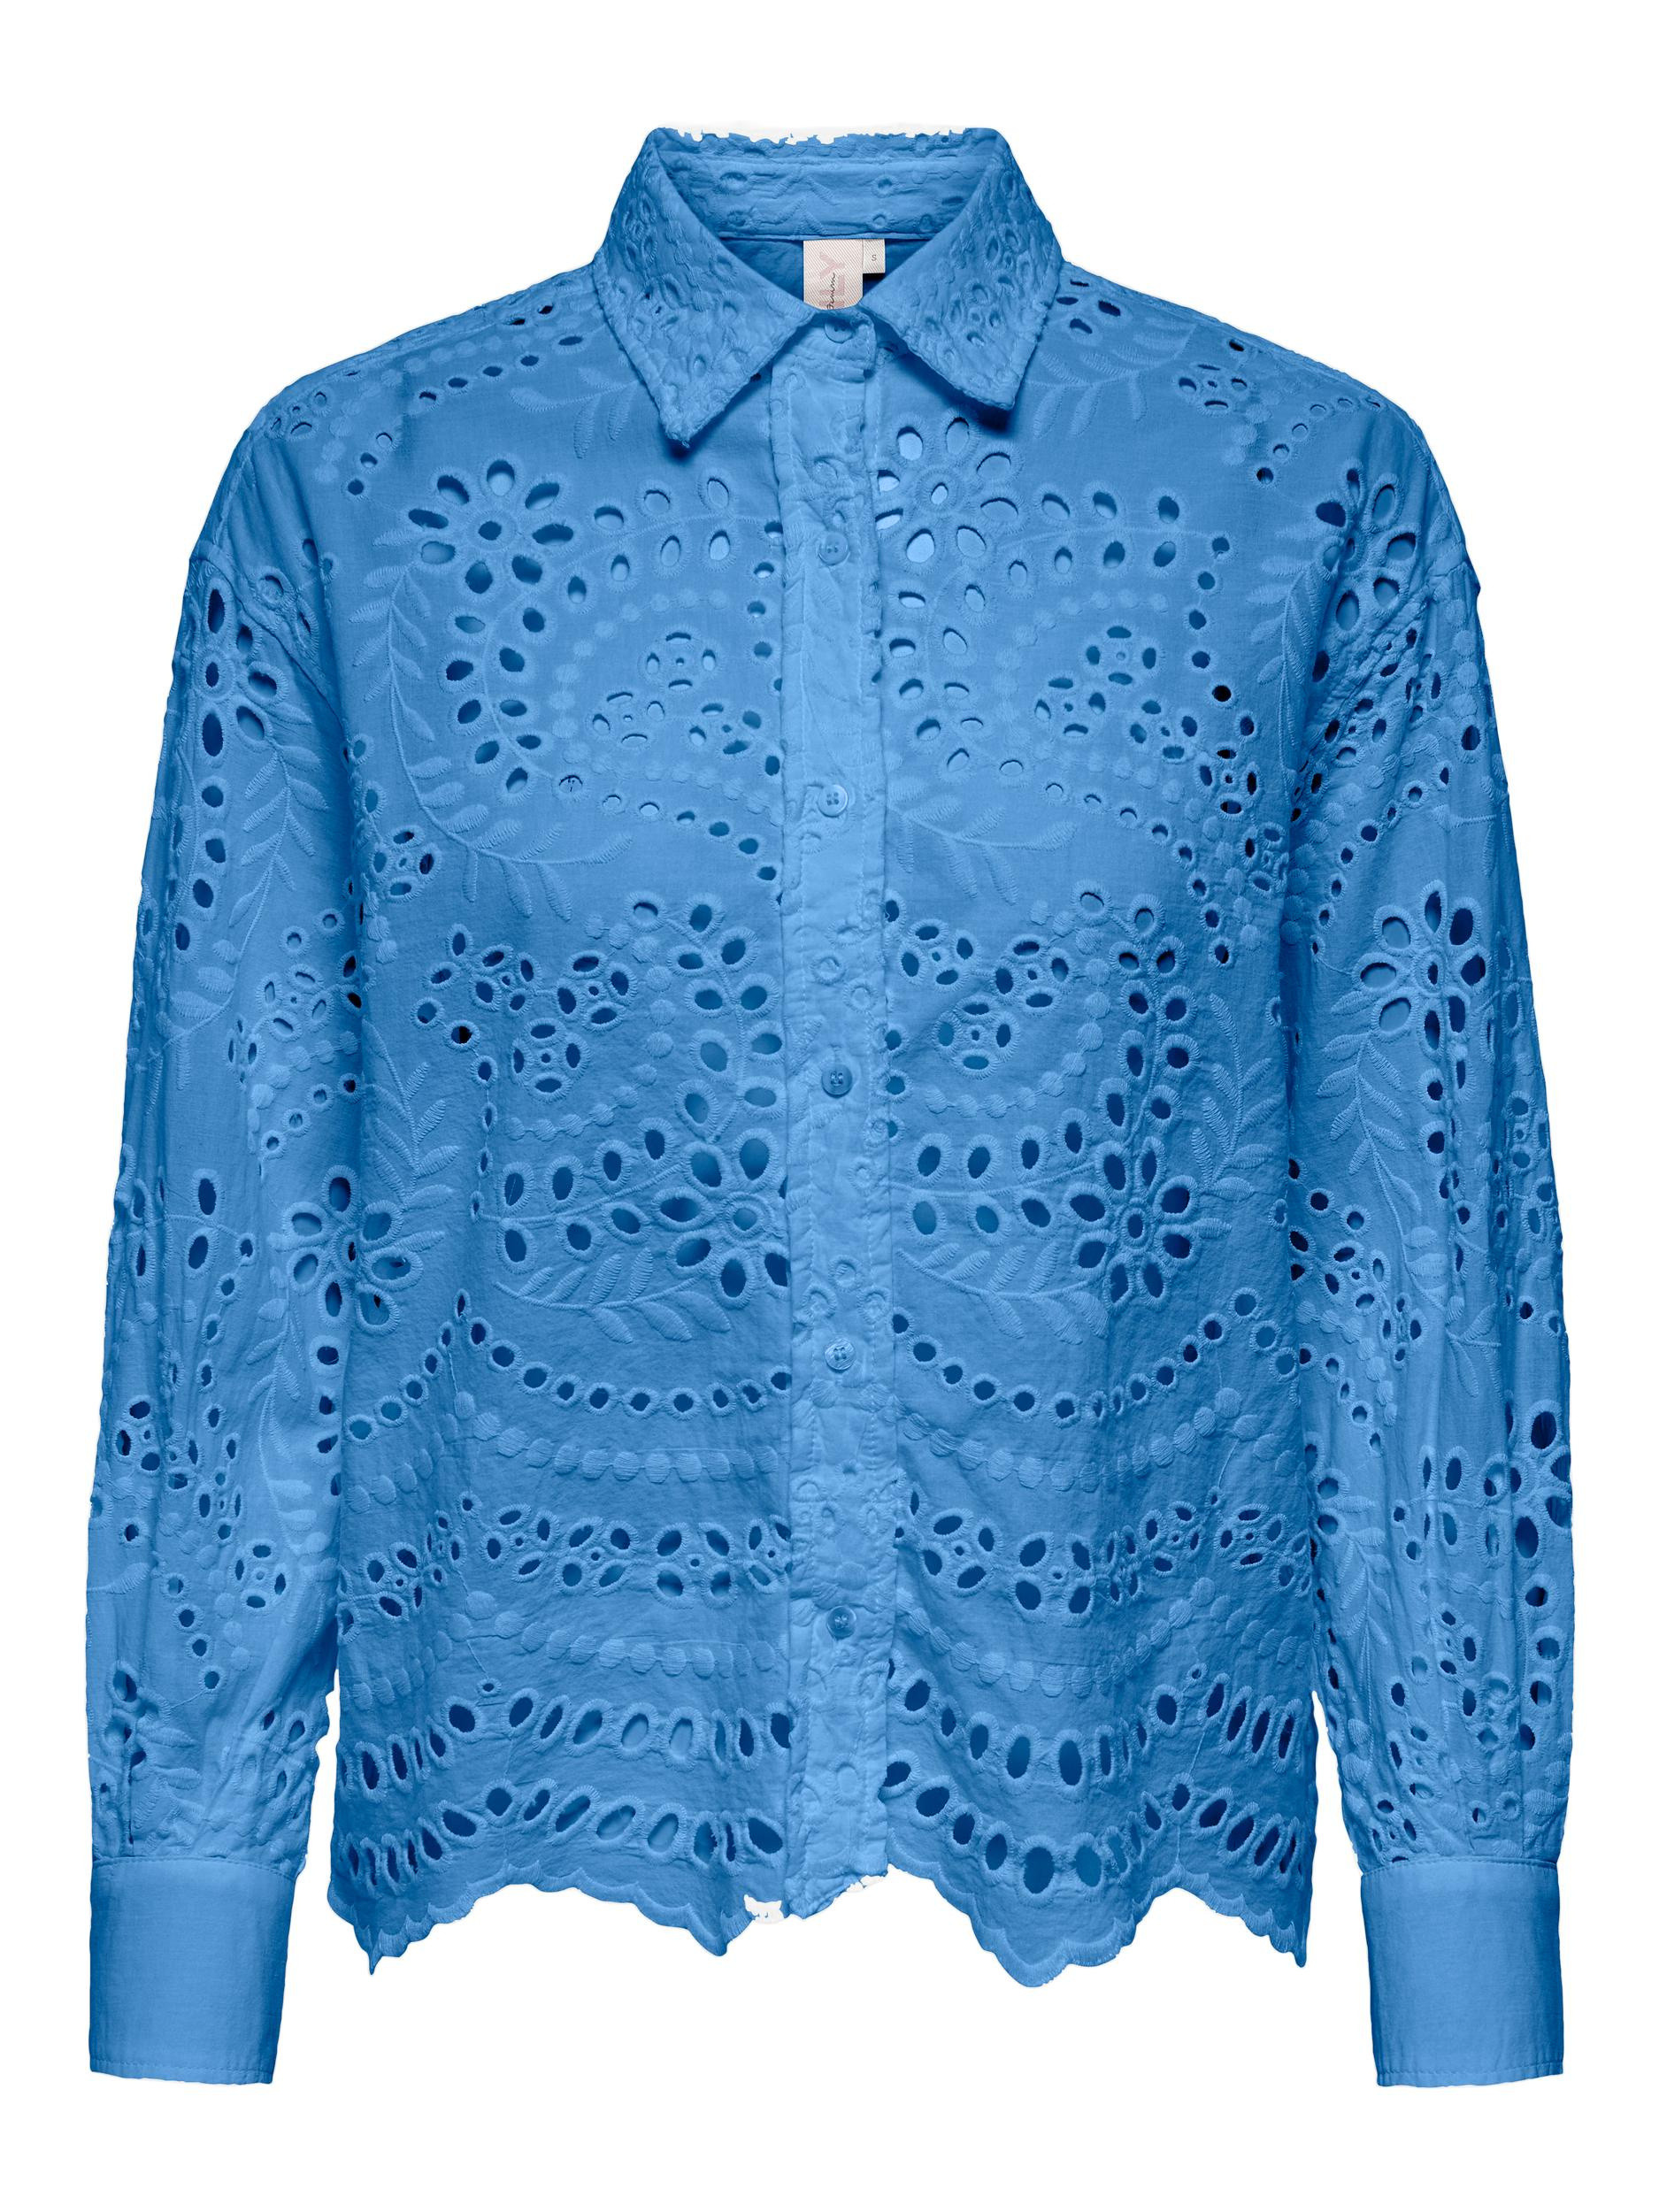 Only - Boxy fit lace shirt, Light Blue, large image number 0